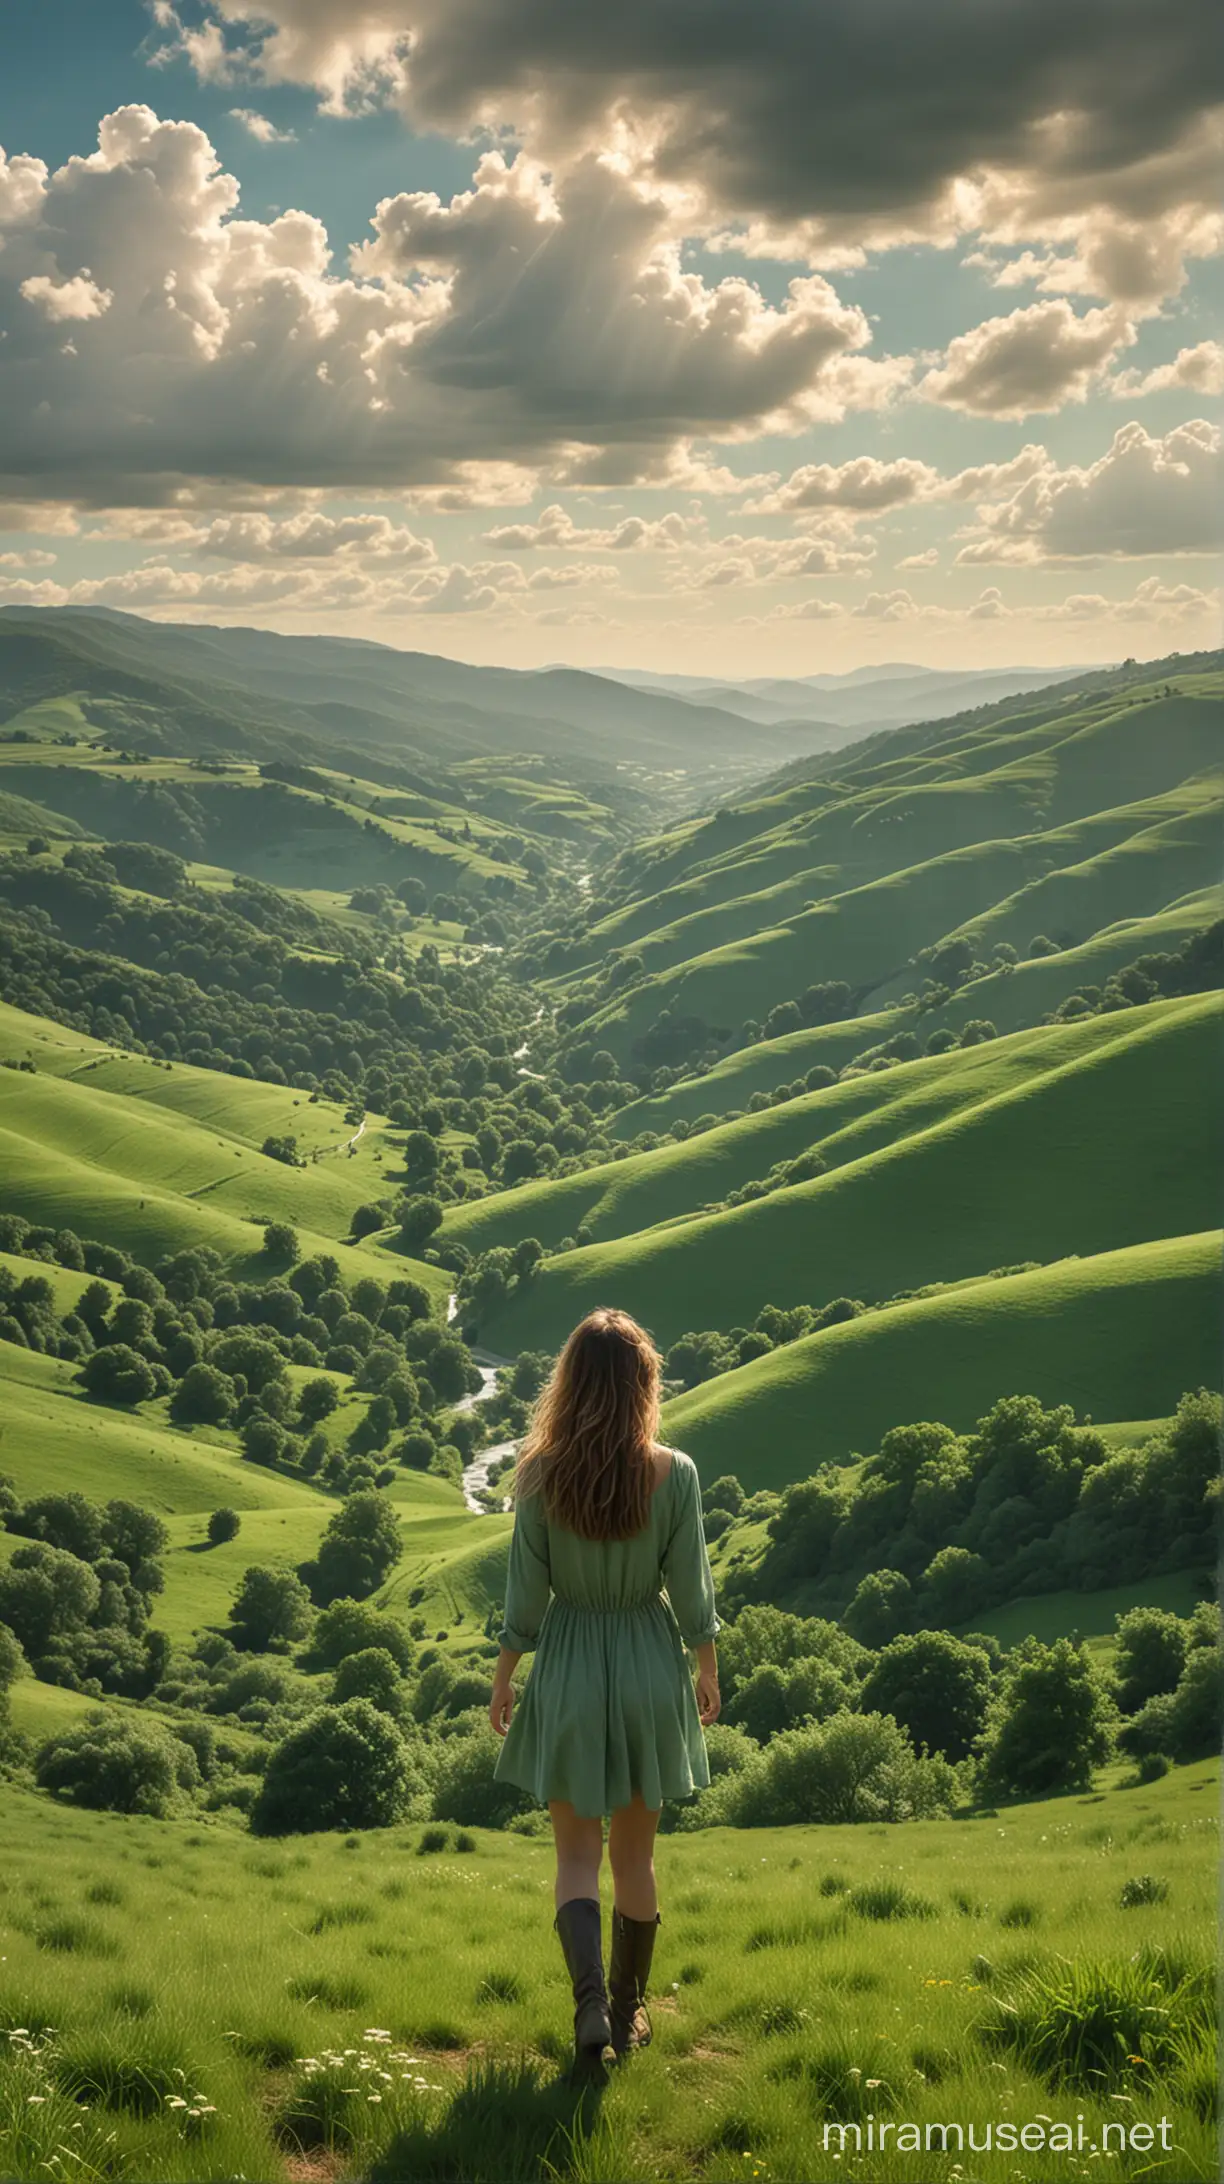 we are shown a photo where a girl close-up,  with her back to us is standing in front of a wide Panoramic view of flying over green hills, representing the seamless transition in the dream of flight. The landscape is rolling and expansive, with varying shades of green and occasional patches of trees and fields. The scene captures the beauty and tranquility of the hills from above, emphasizing the dreamlike and peaceful journey through nature.